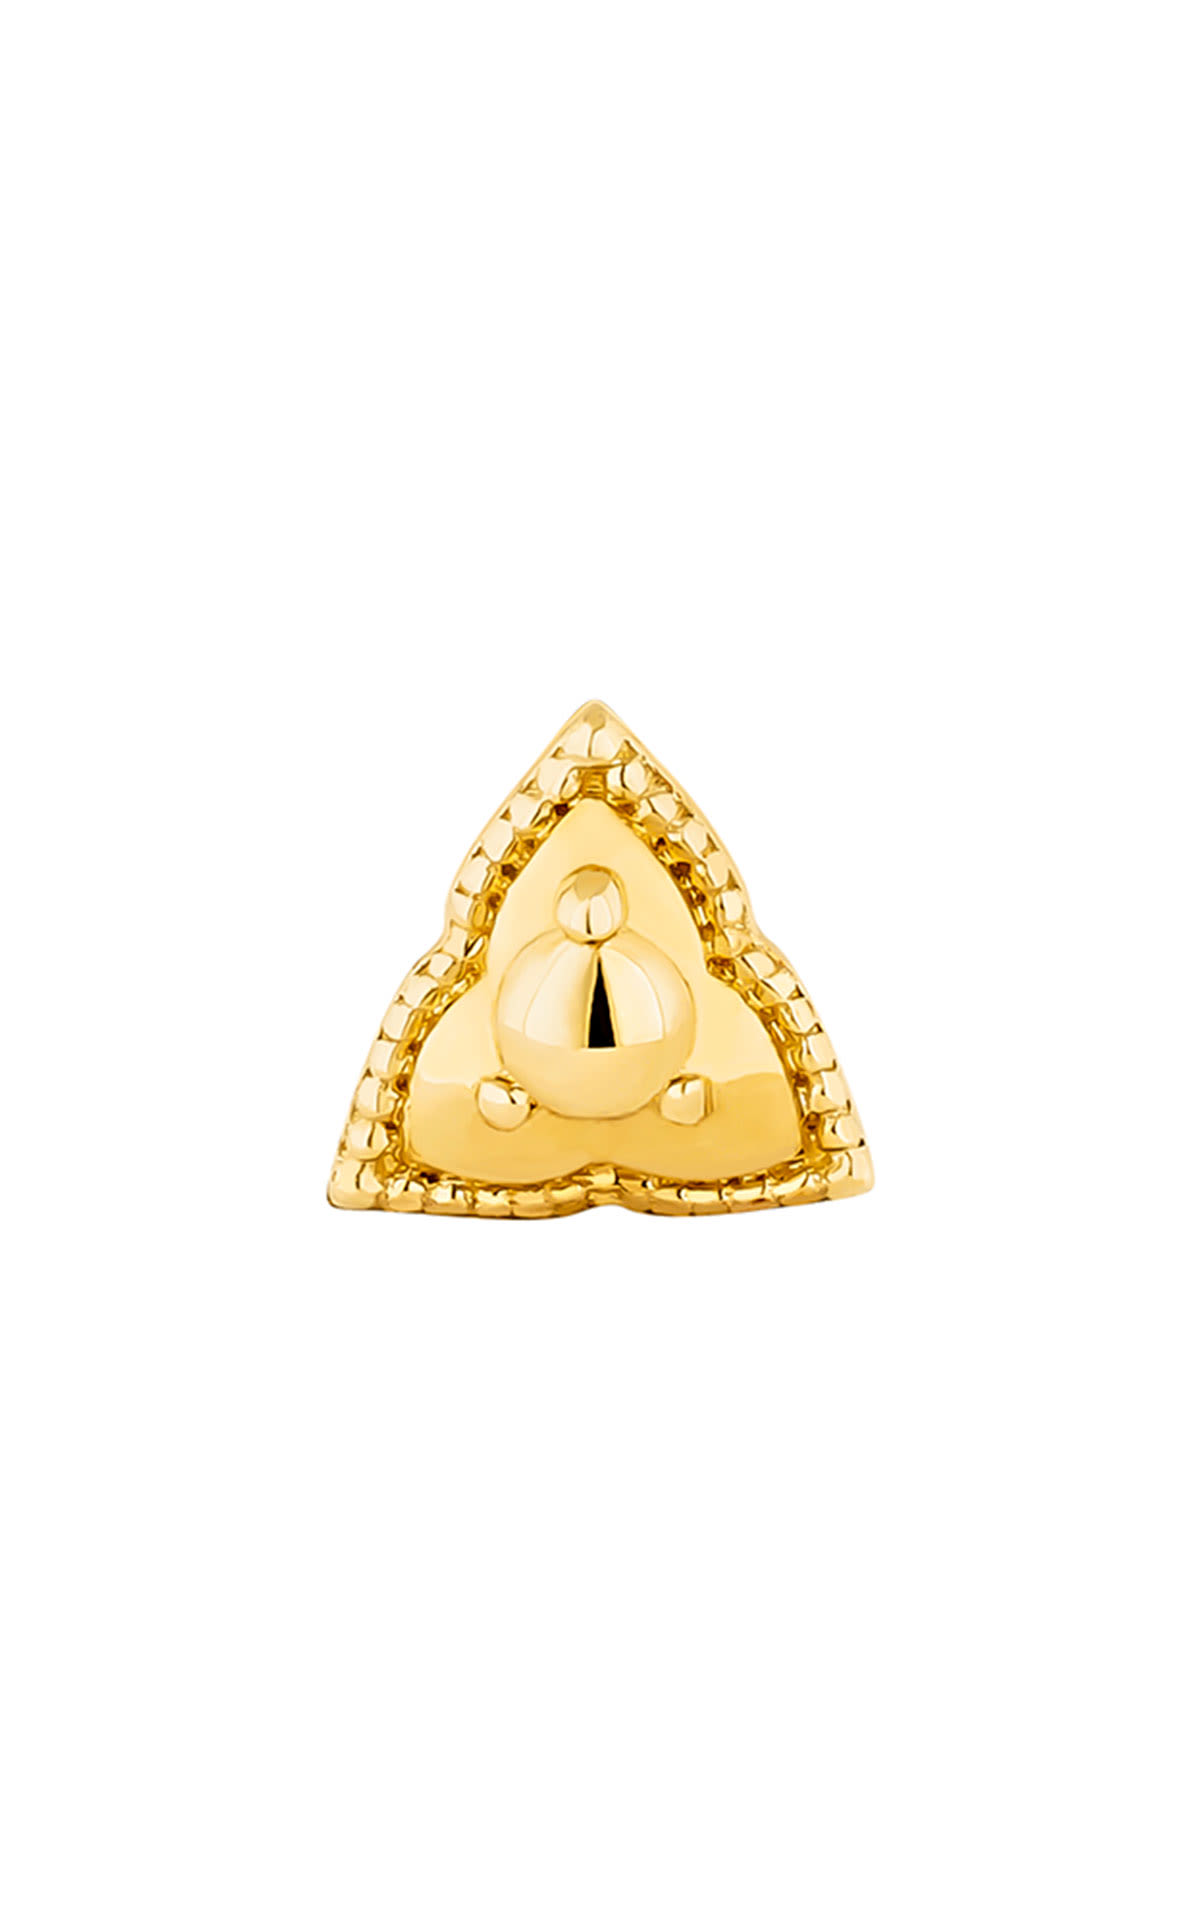 Gold pin aristocrazy